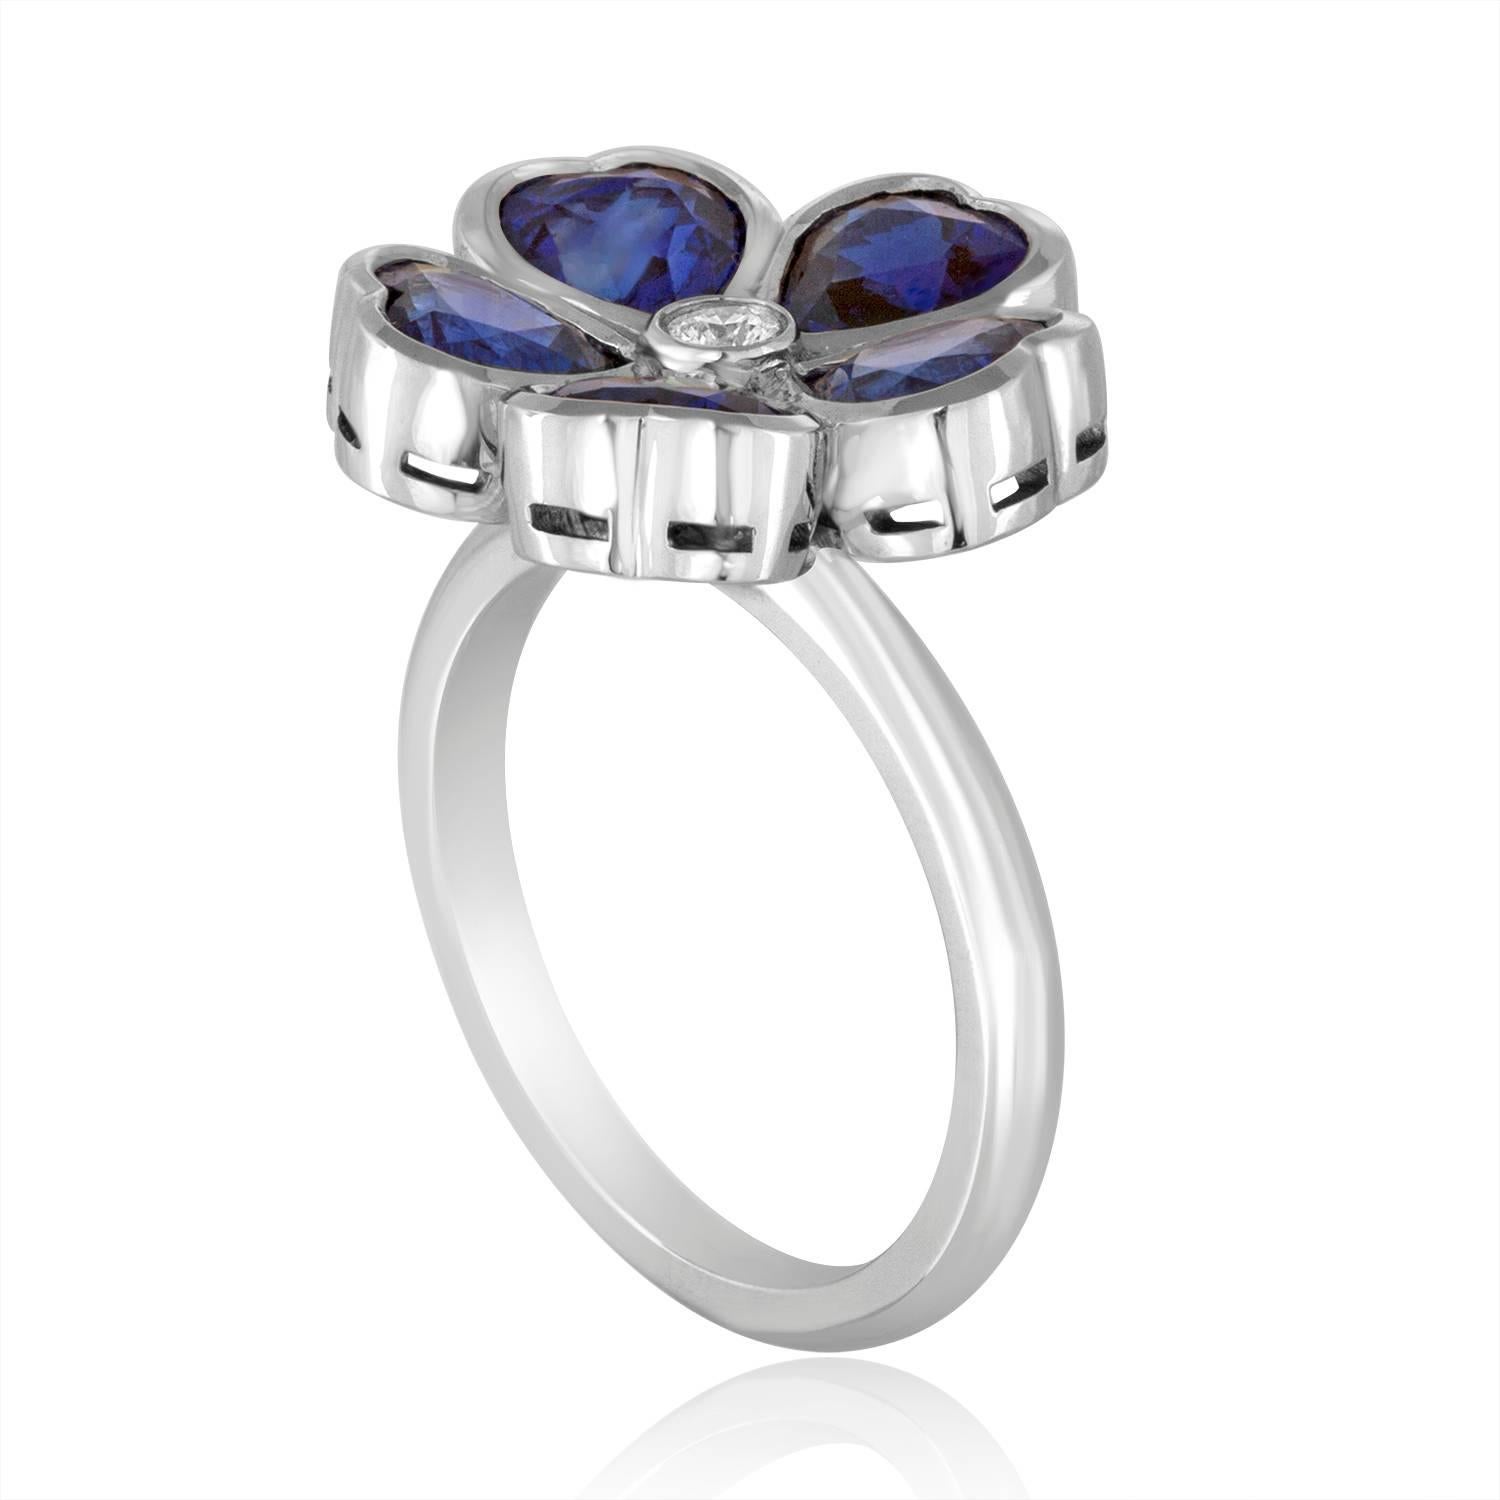 Custom Made and Master Crafted Sapphire Flower Ring
5 Heart Shaped Sapphires petaled around One Round Cut Diamond
The ring is 18K White Gold
There are 3.92 Carats Blue Sapphires Heart Shaped
There is 0.05 Carat Diamond F VS
The flower portion is